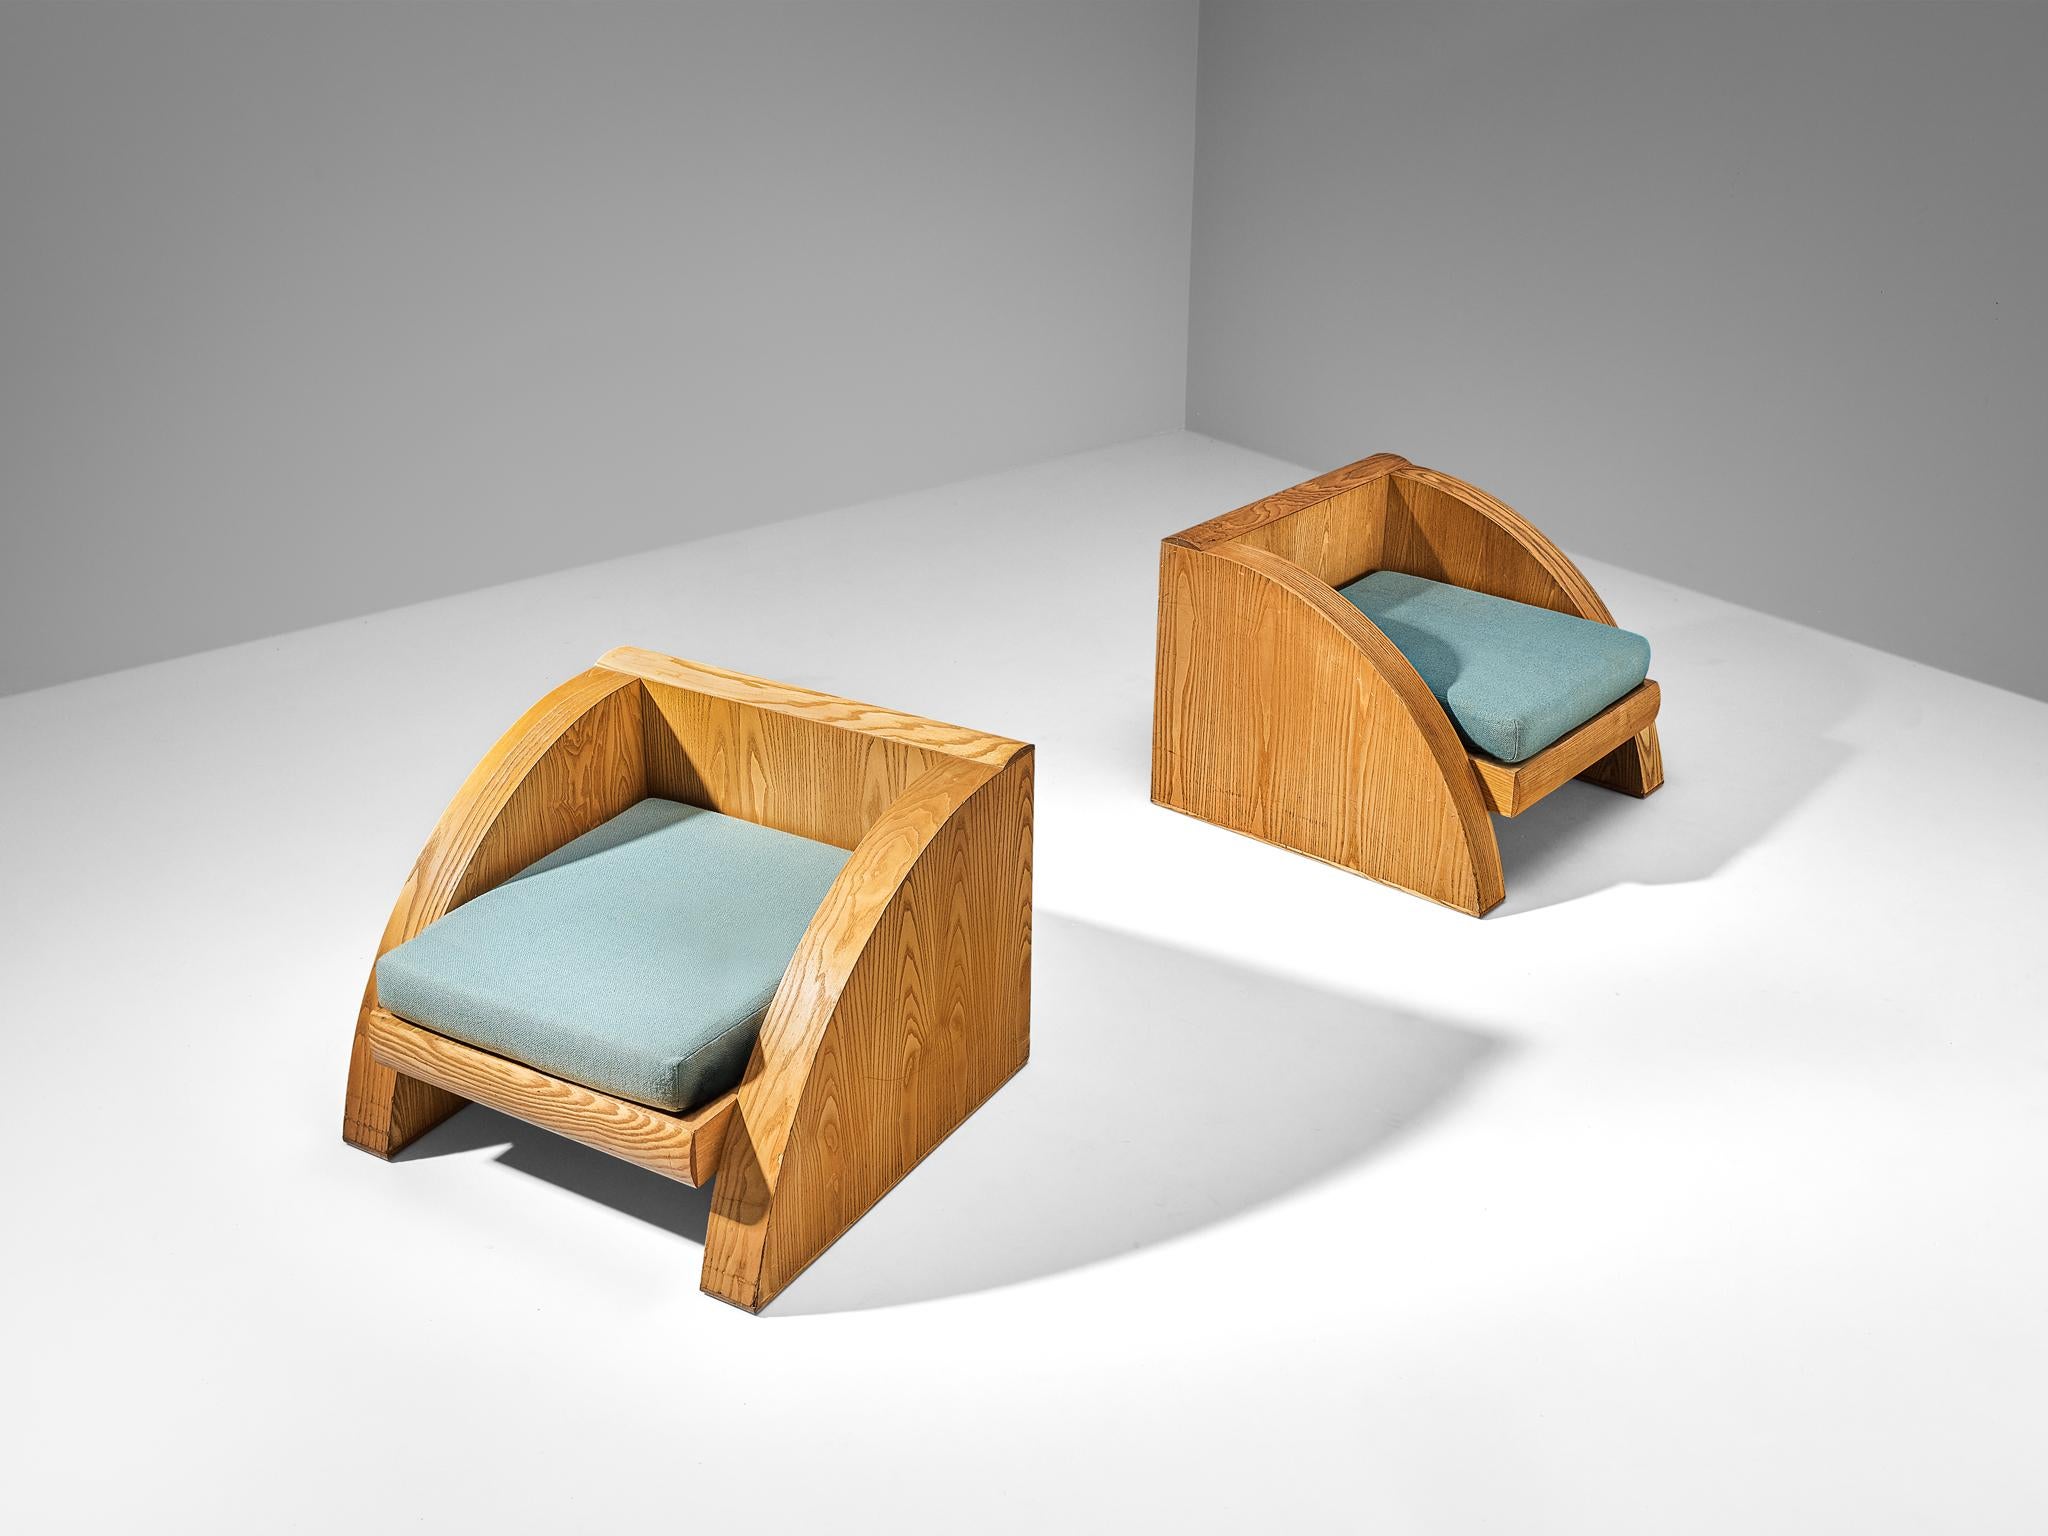 Pair of lounge chairs, oak, fabric, Europe, 1980s

Spectacular pair of well shaped and stylish lounge chairs. This pair of chairs has a pretty unique curved appearance that you do not come across often. The craftsmanship shown in these pieces is